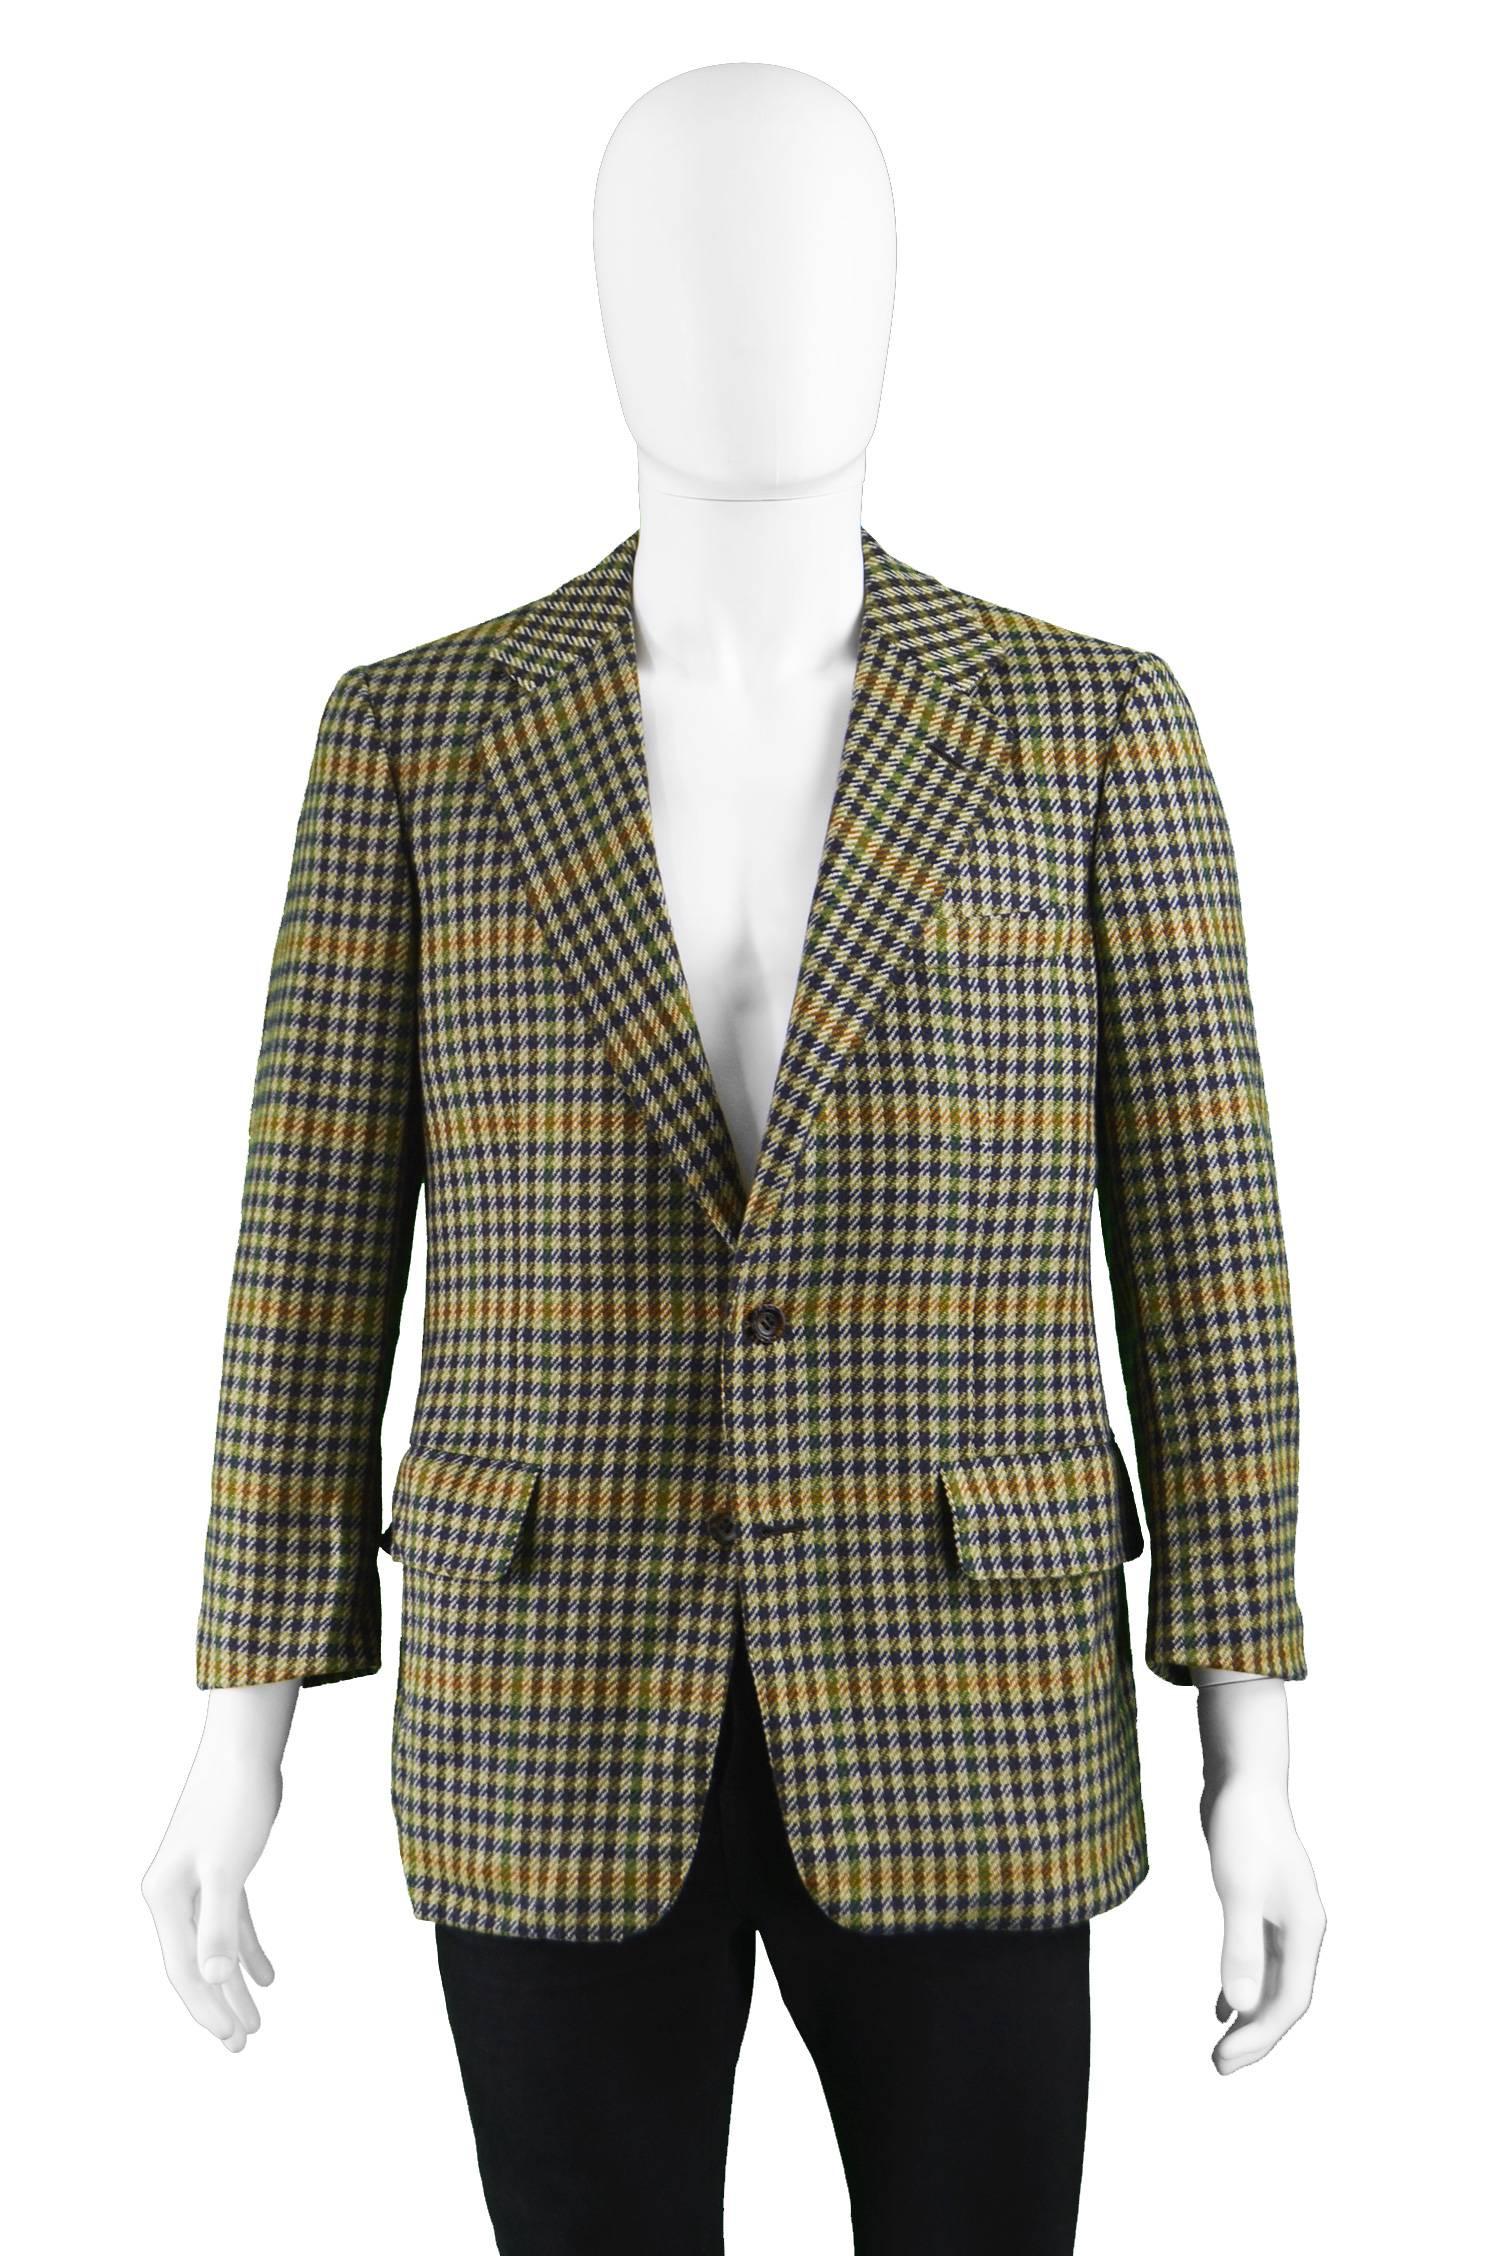 Gray Chester Barrie for Harrods Men's Vintage Pure Cashmere Checked Jacket, 1970s For Sale